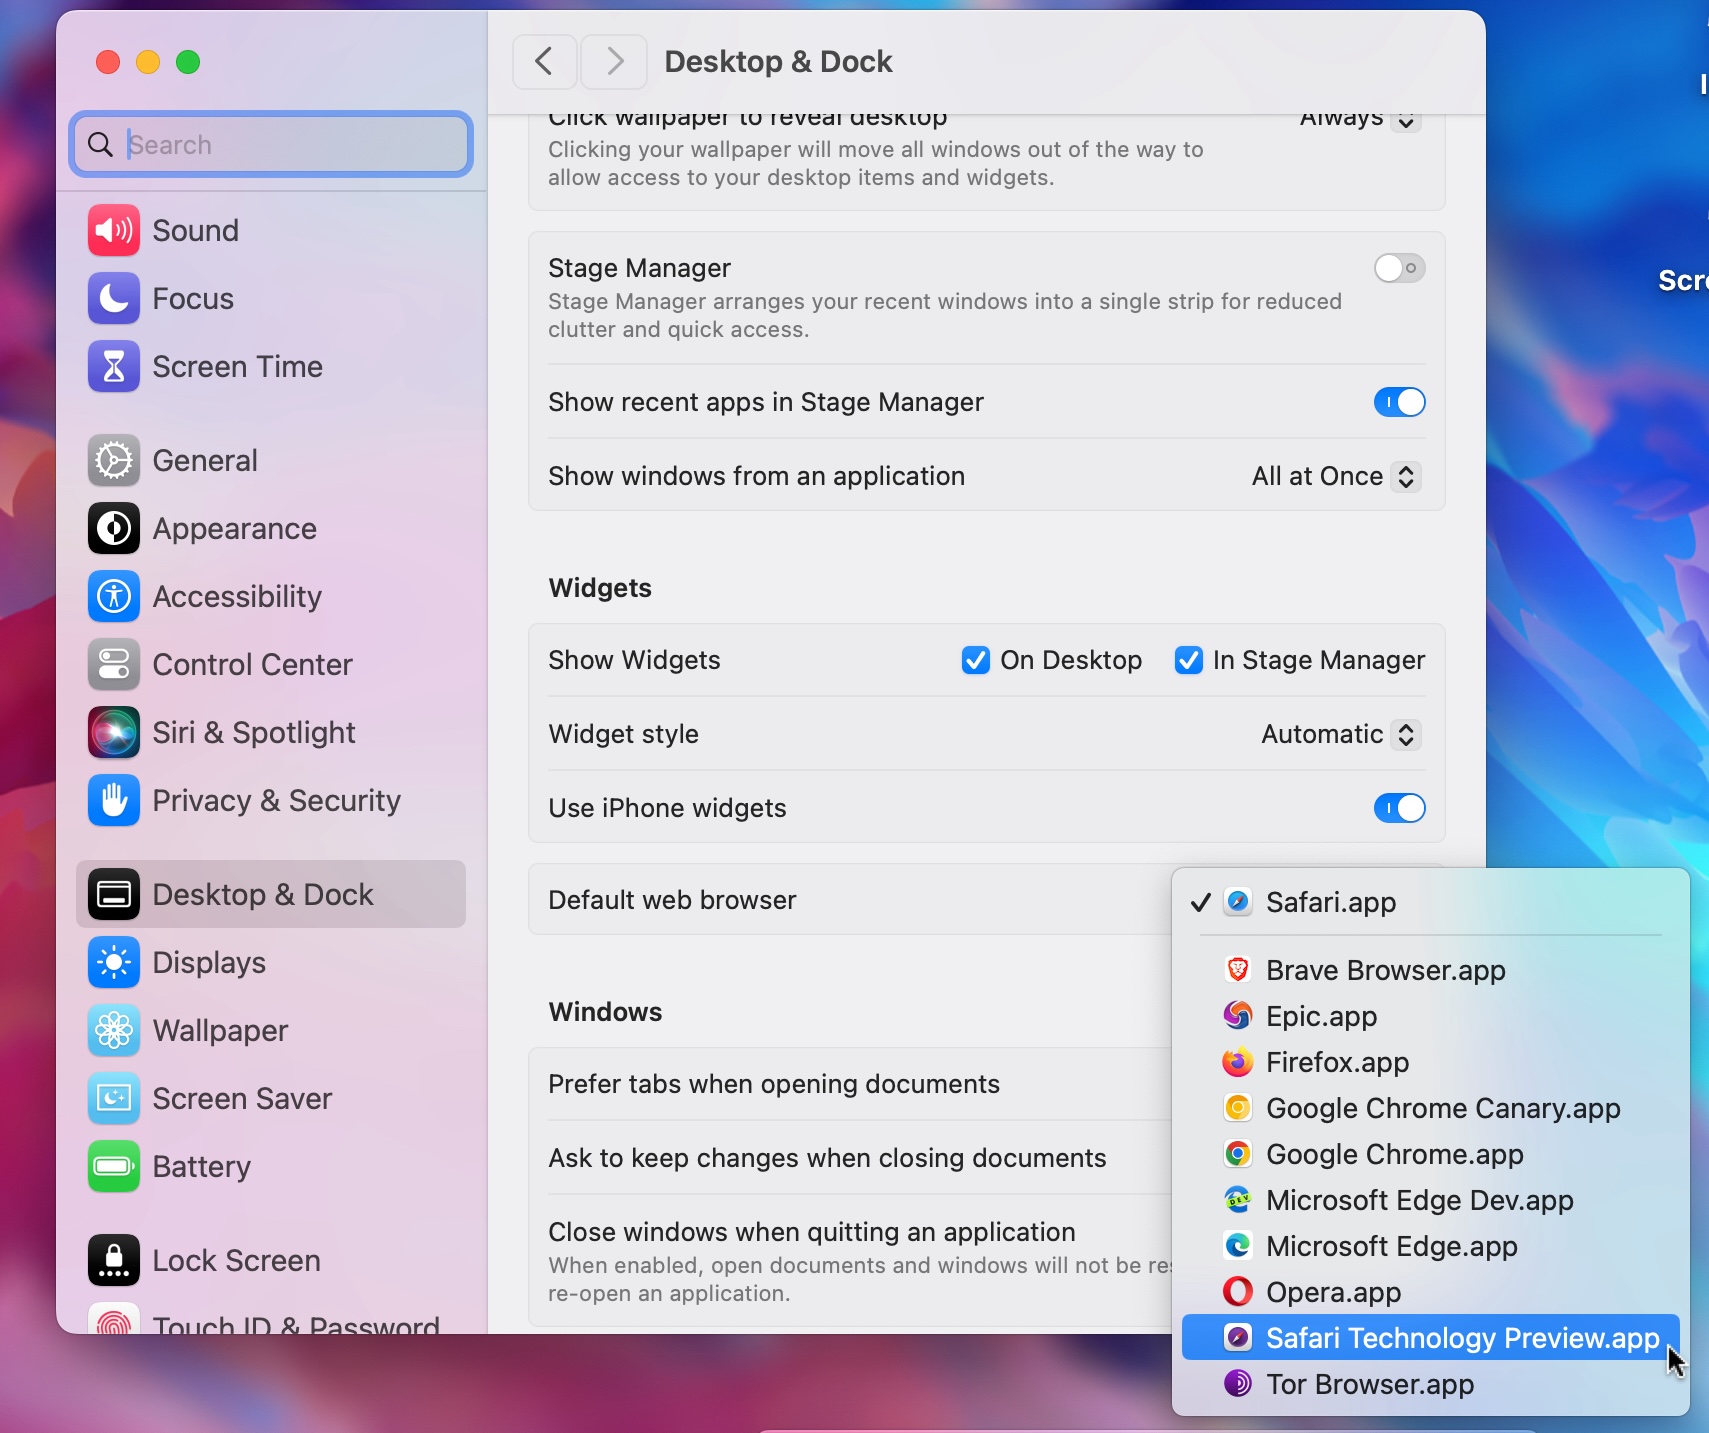 How to Set Default Web Browser in MacOS Sonoma